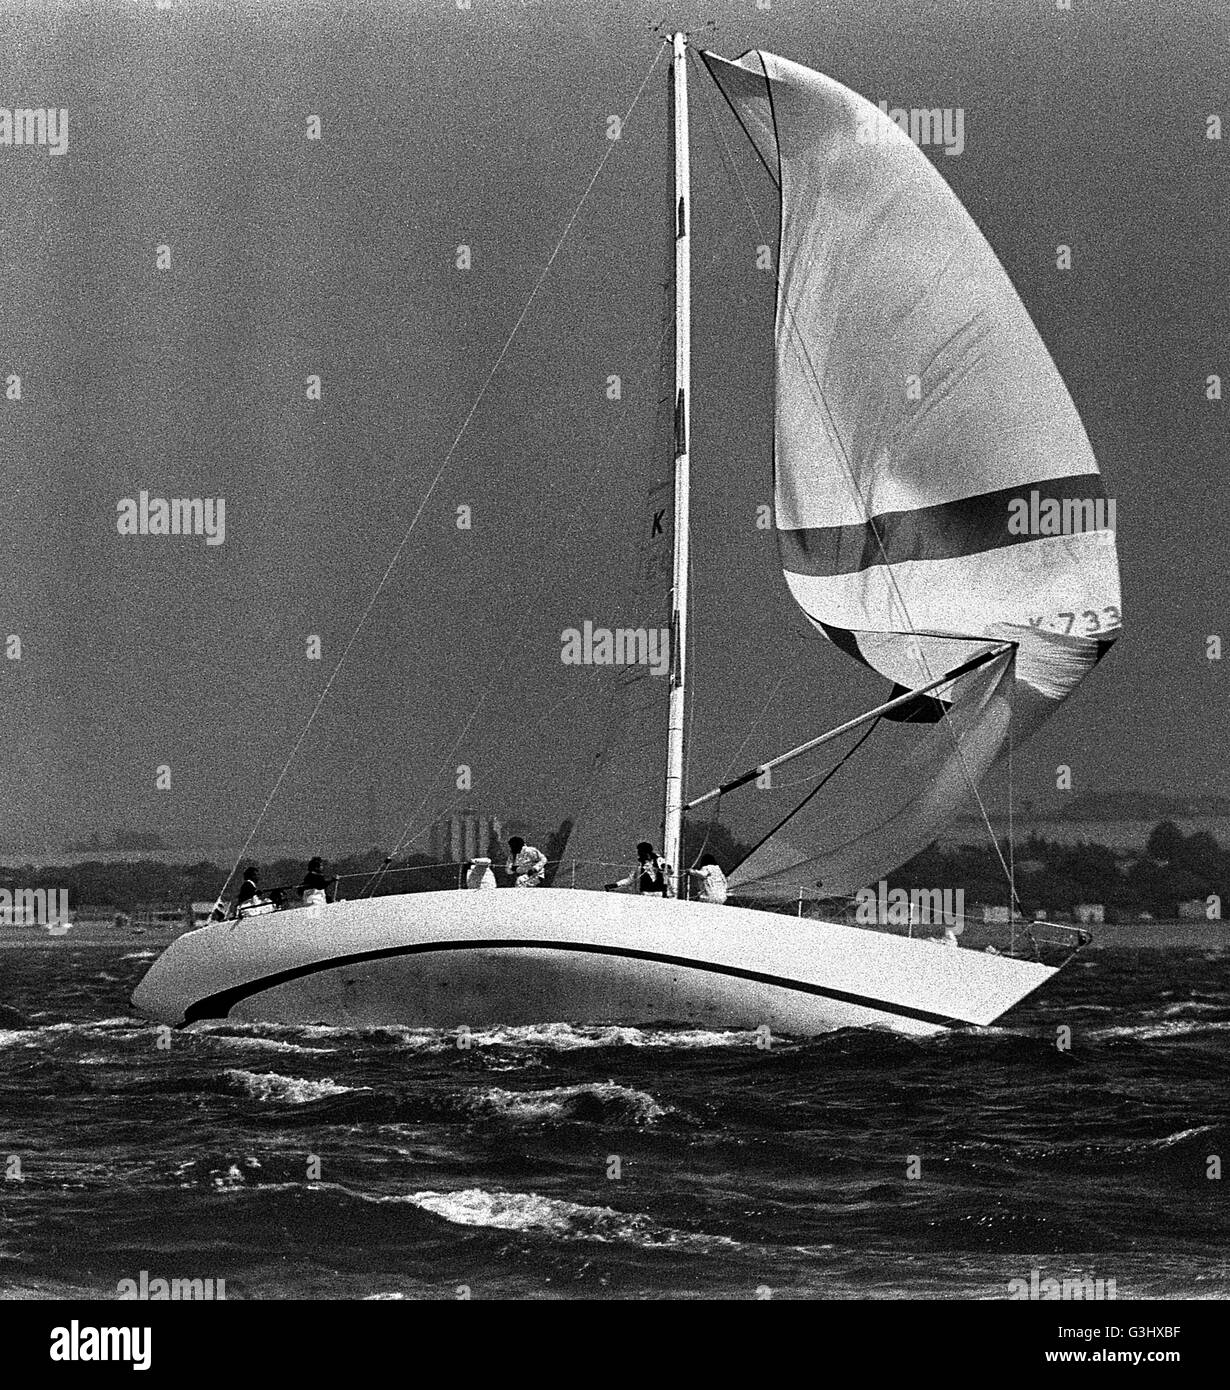 AJAXNETPHOTO. 1979. SOLENT, ENGLAND. - ADMIRAL'S CUP - SOLENT INSHORE RACE. BLIZZARD (GBR) IN TROUBLE IN GUSTY CONDITIONS. PHOTO:JONATHAN EASTLAND/AJAX REF:79 2017 Stock Photo